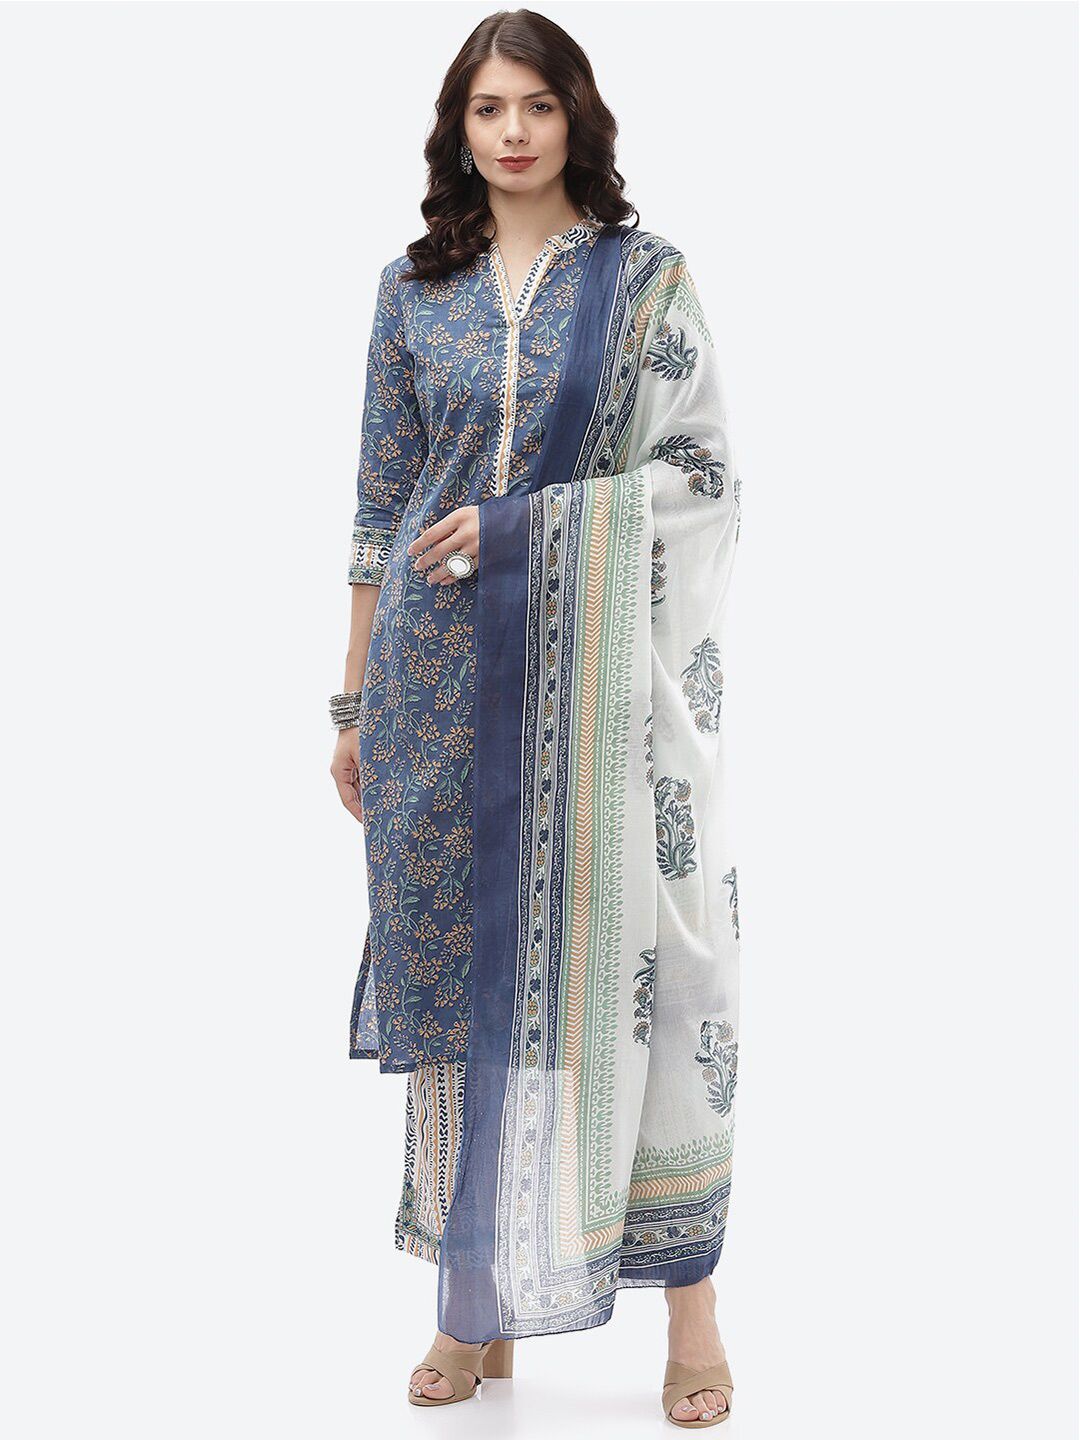 Biba Turquoise Blue & White Unstitched Dress Material Price in India